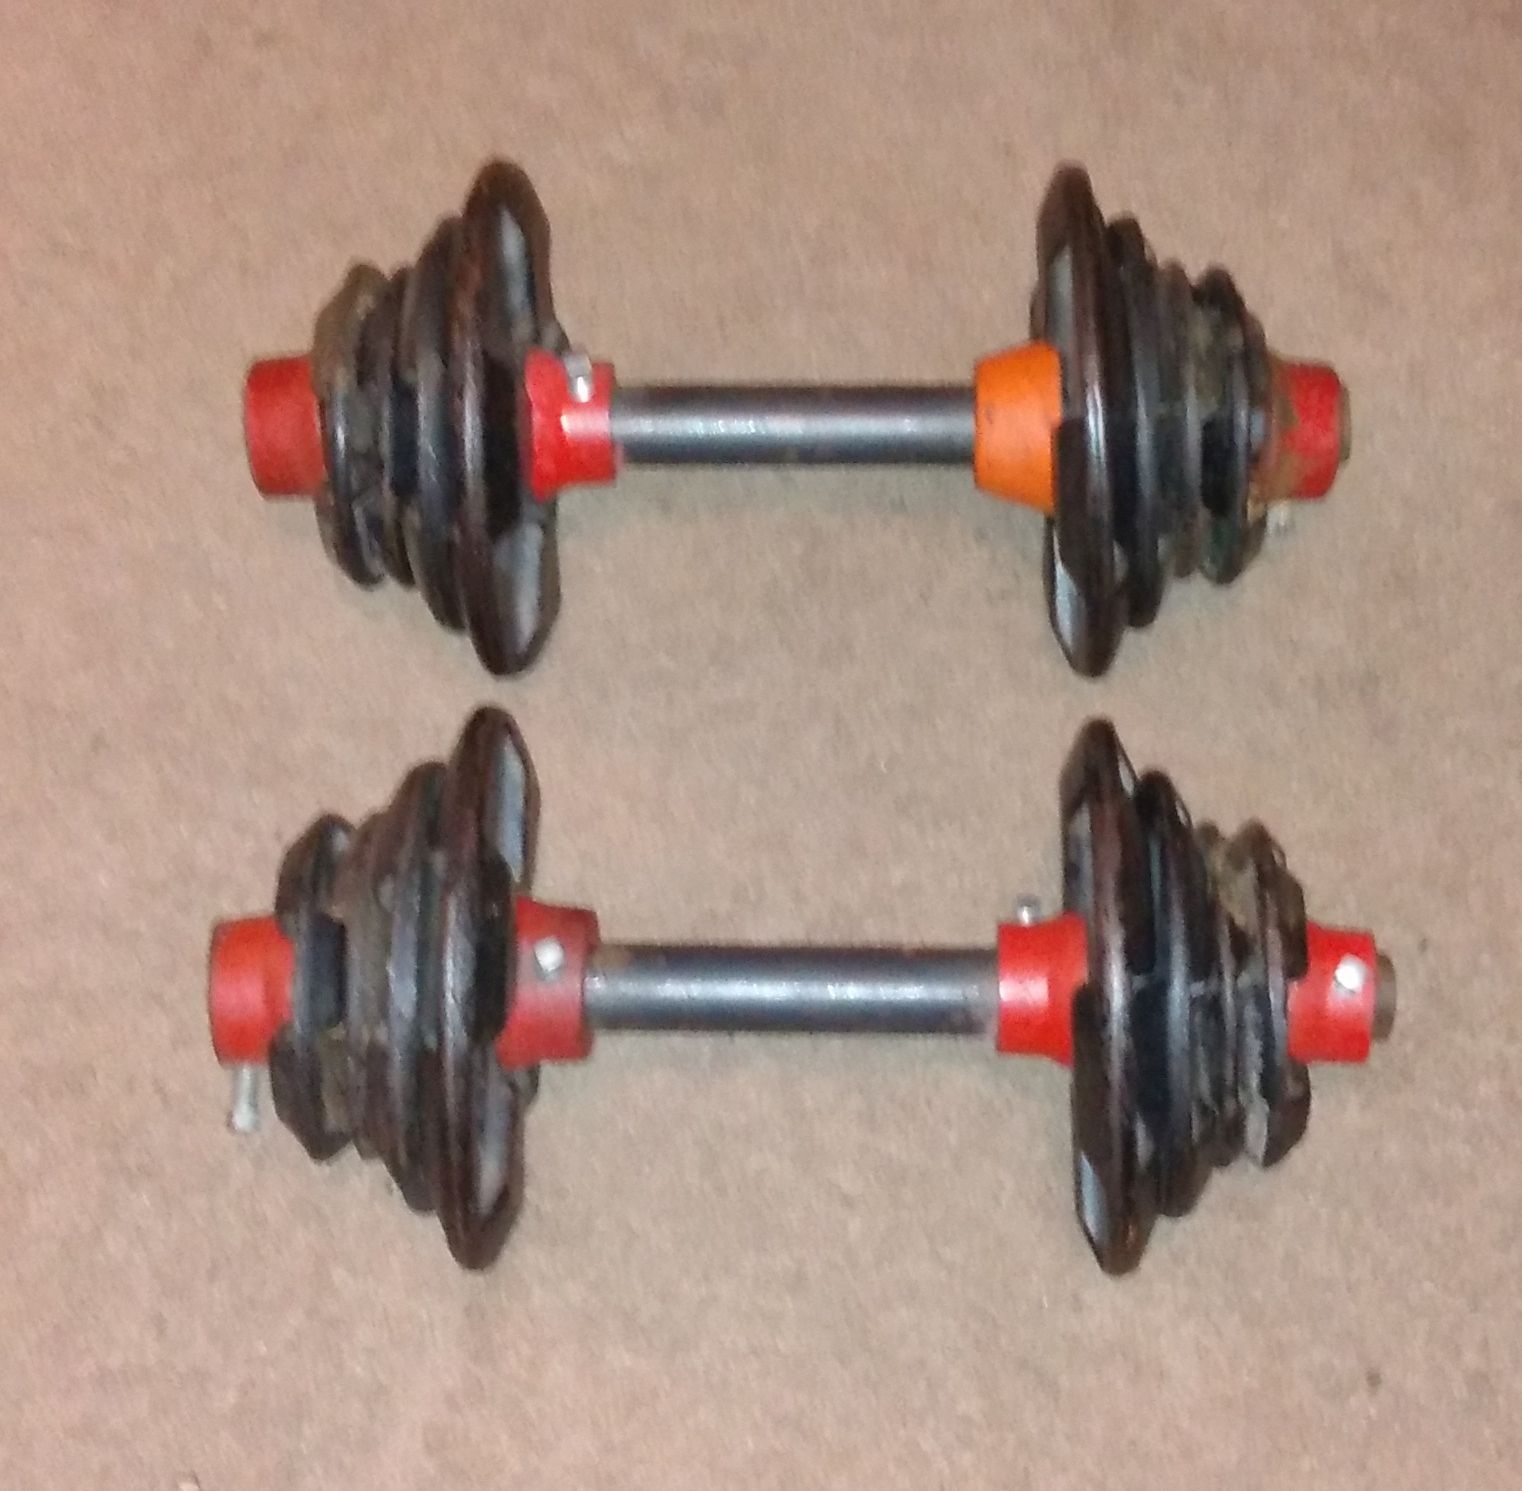 Dumbbell Pair - 25 Pounds Each